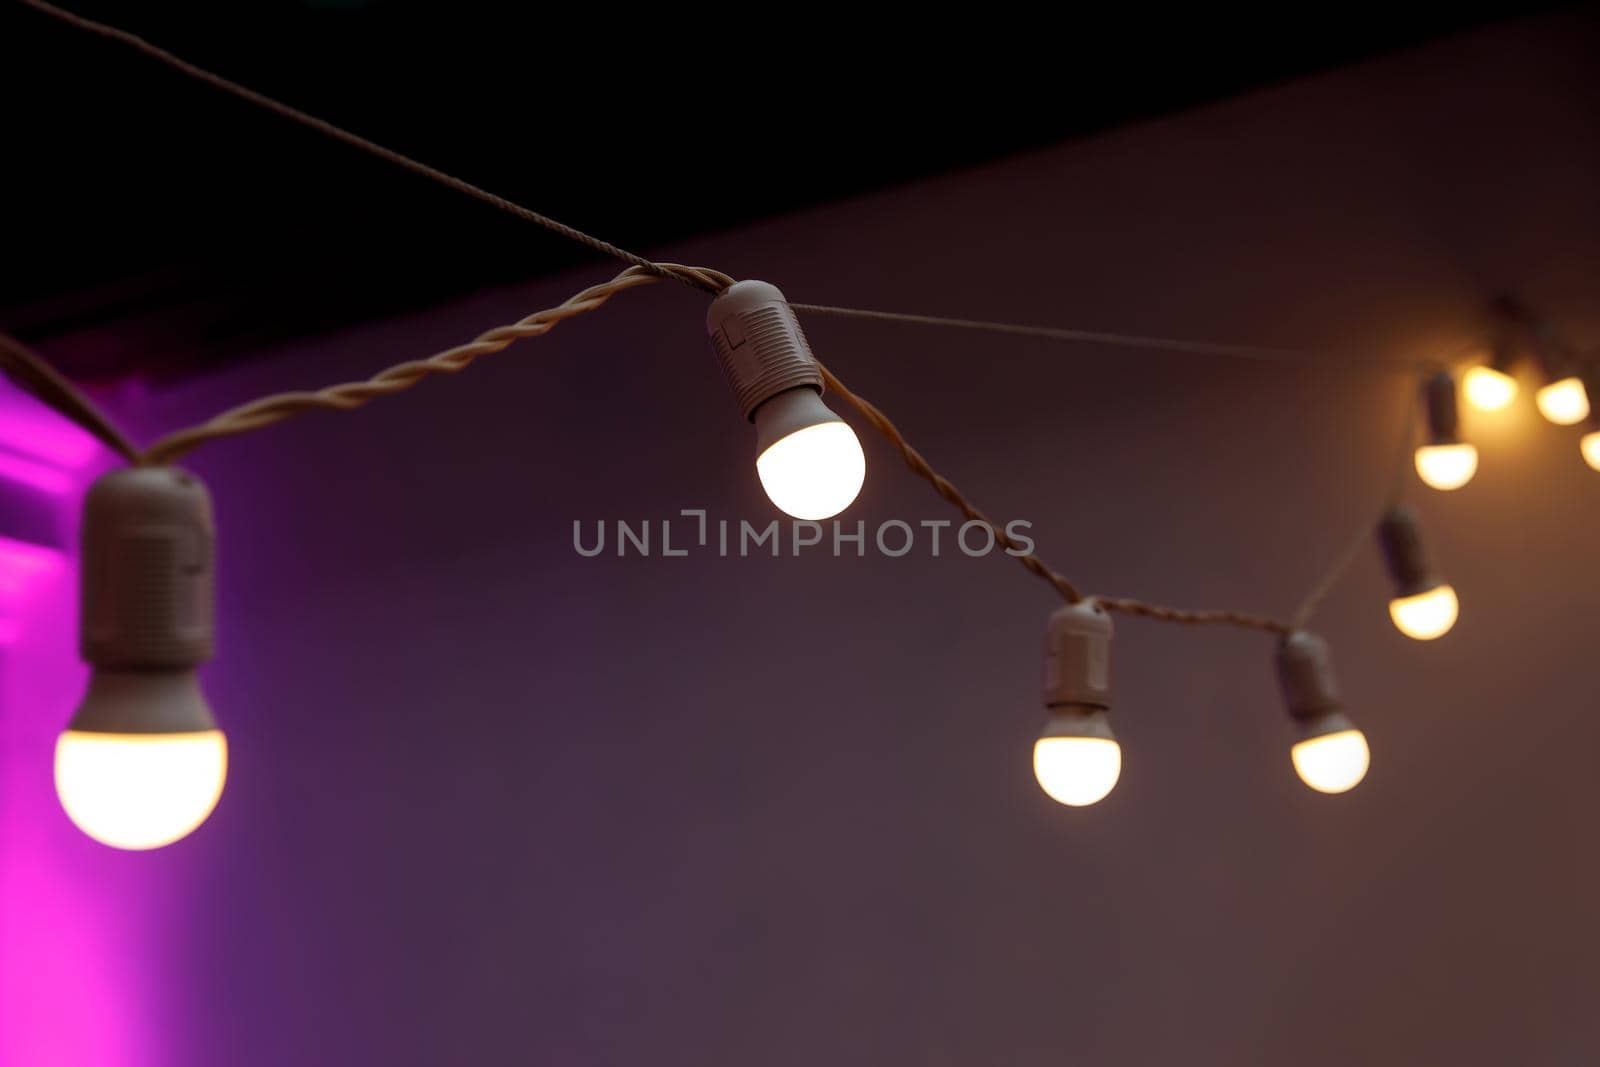 Garland of lamps, Light bulbs on a string